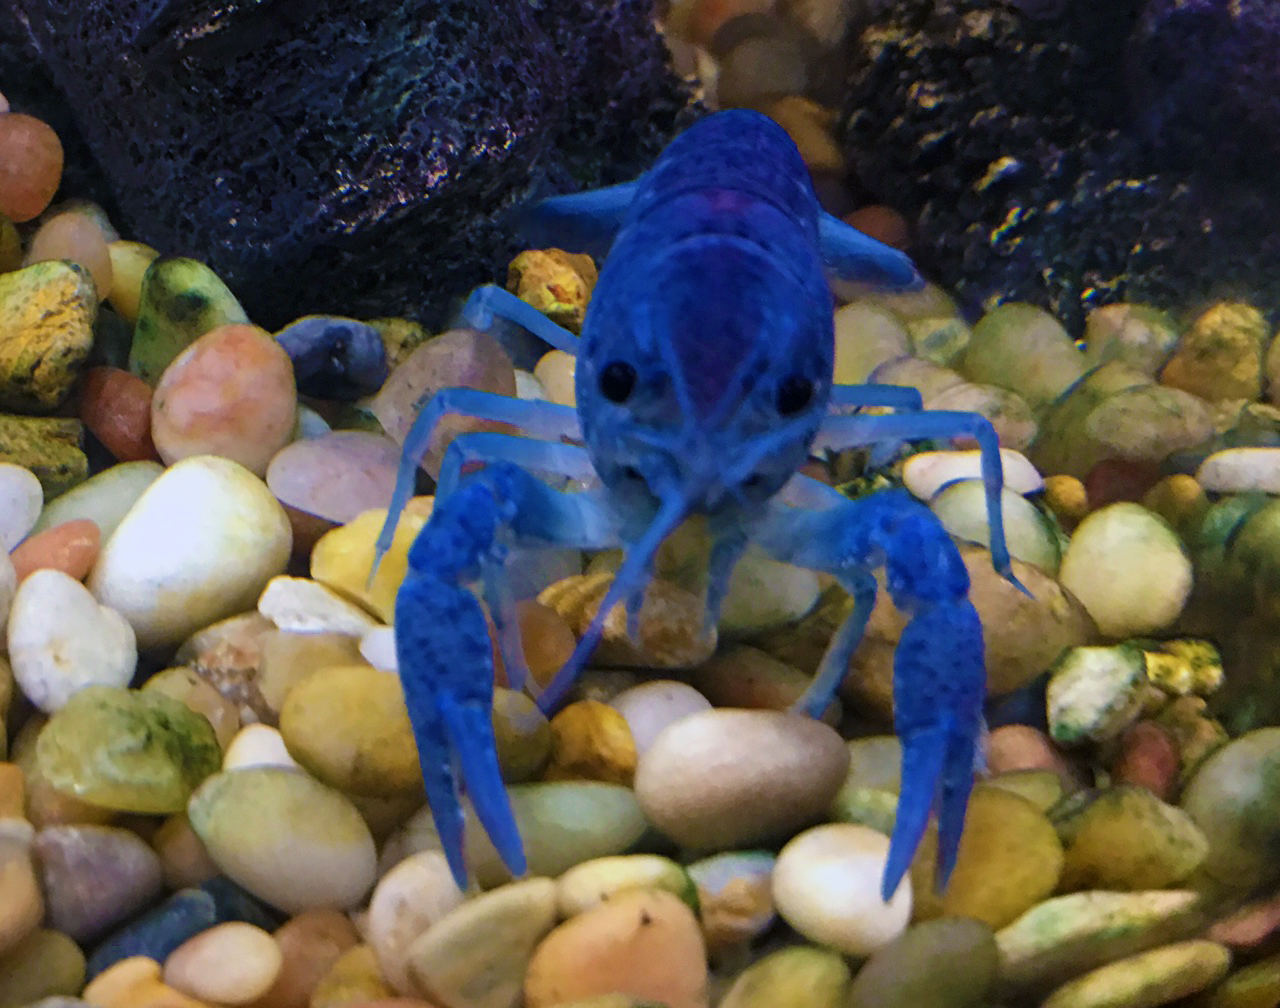 What Do You Need for a Pet Crayfish?